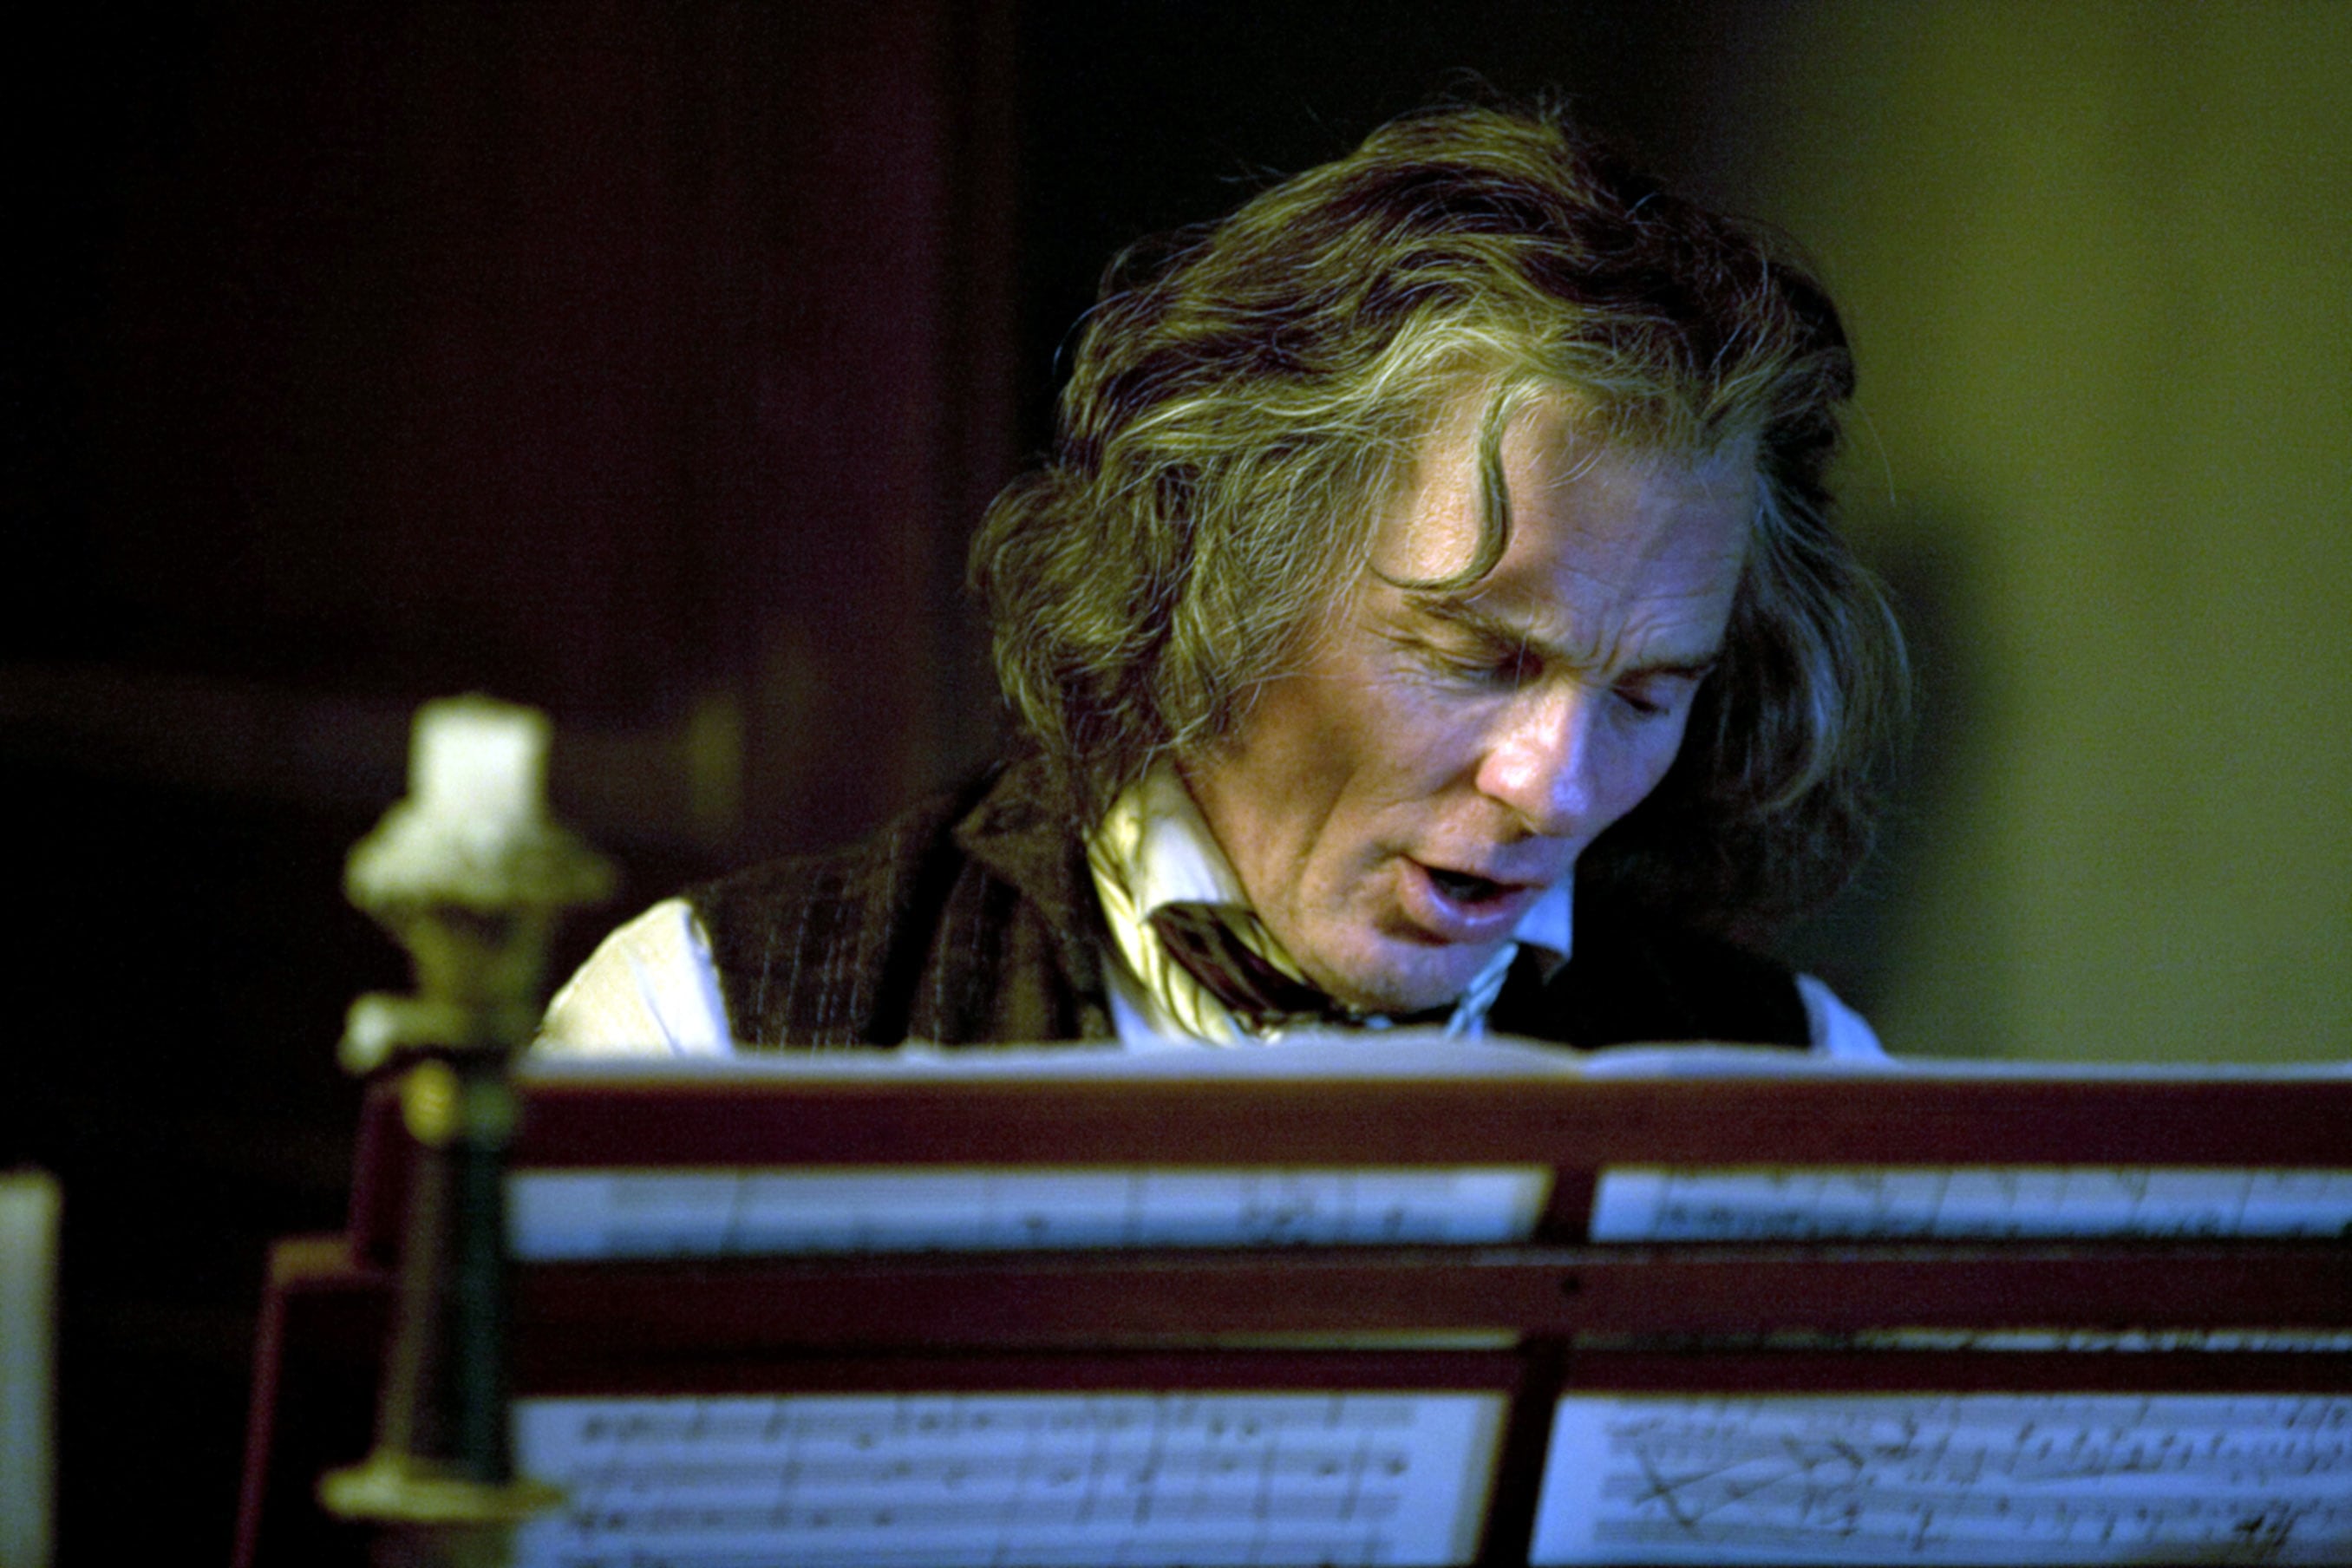 "Copying Beethoven", 2006